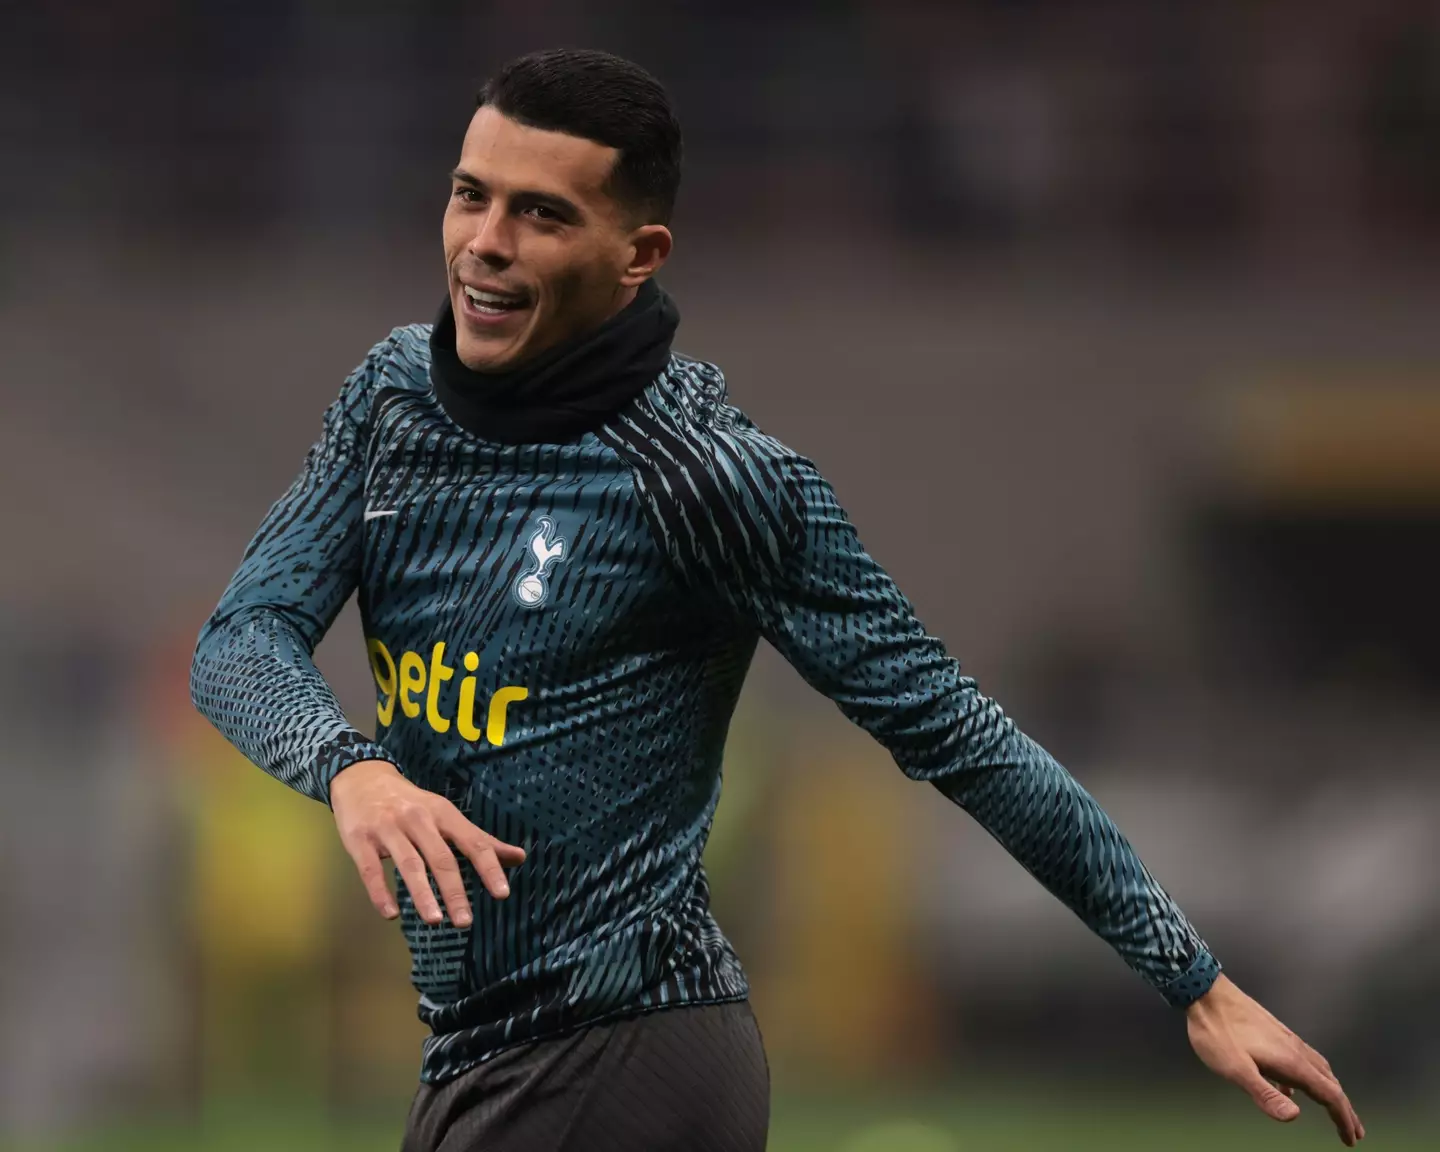 Porro joined Spurs from Sporting CP in January. (Image